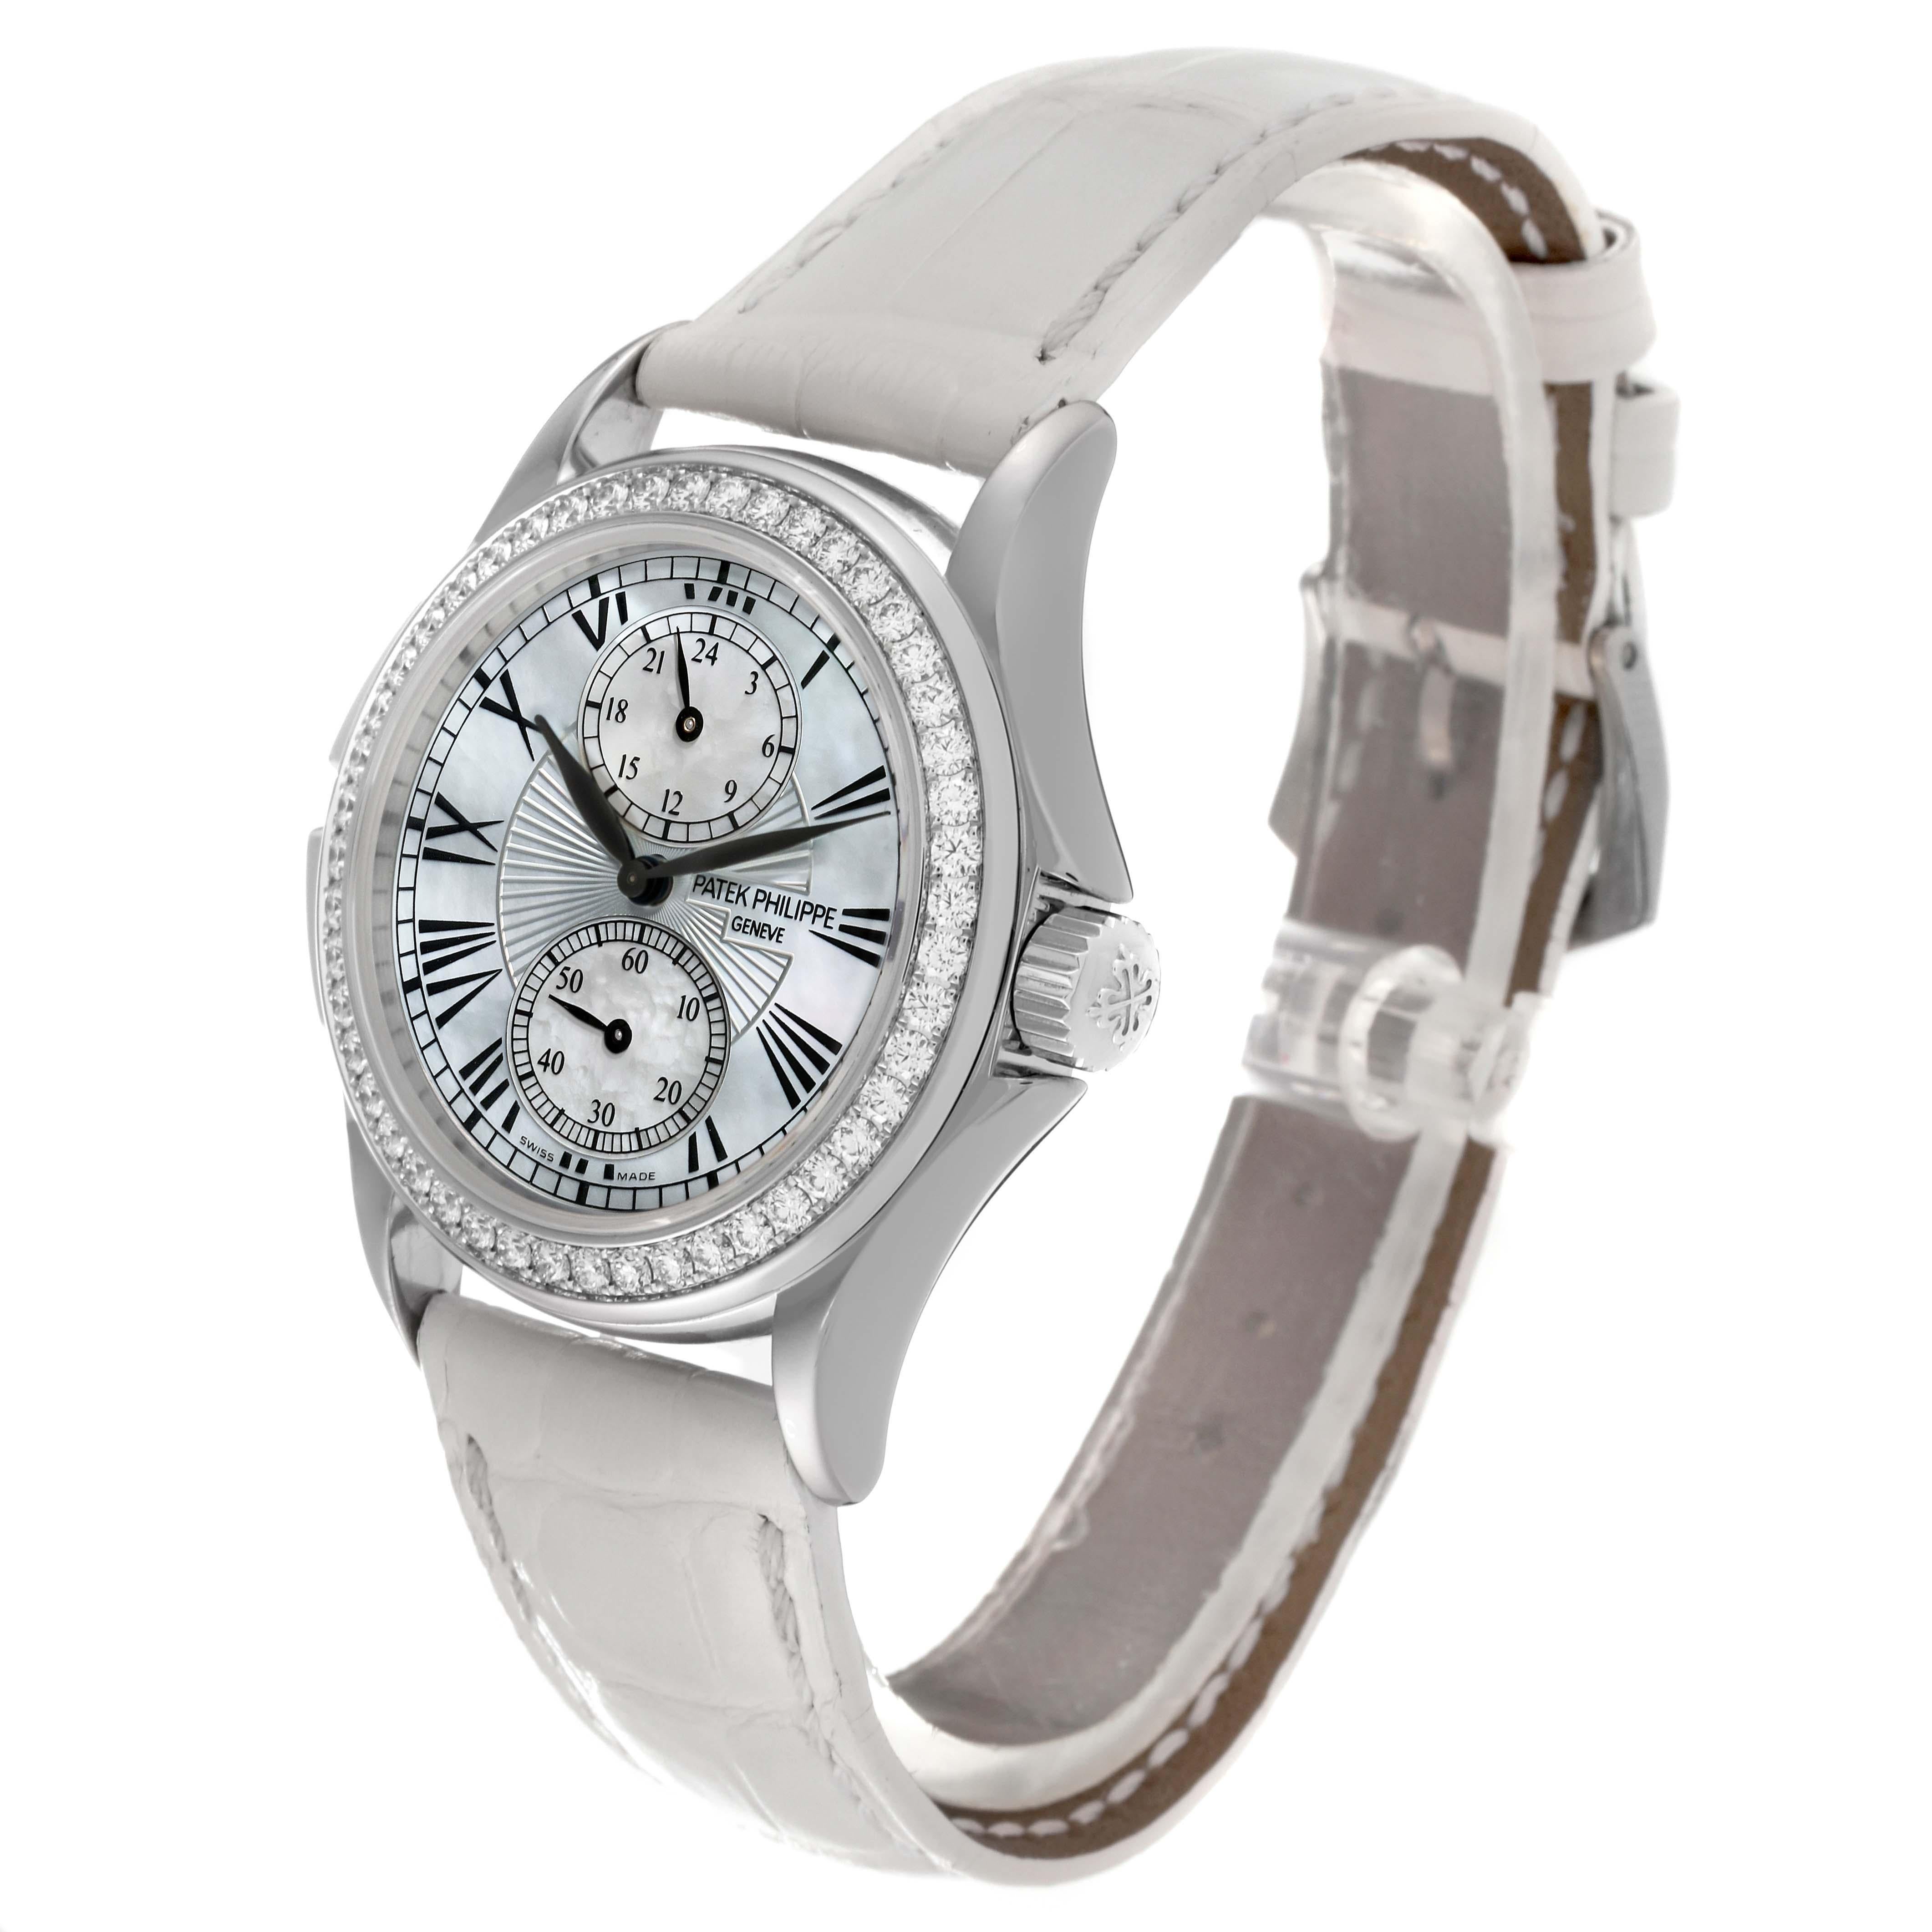 Patek Philippe Calatrava Travel Time White Gold Mother of Pearl Diamond Watch For Sale 2